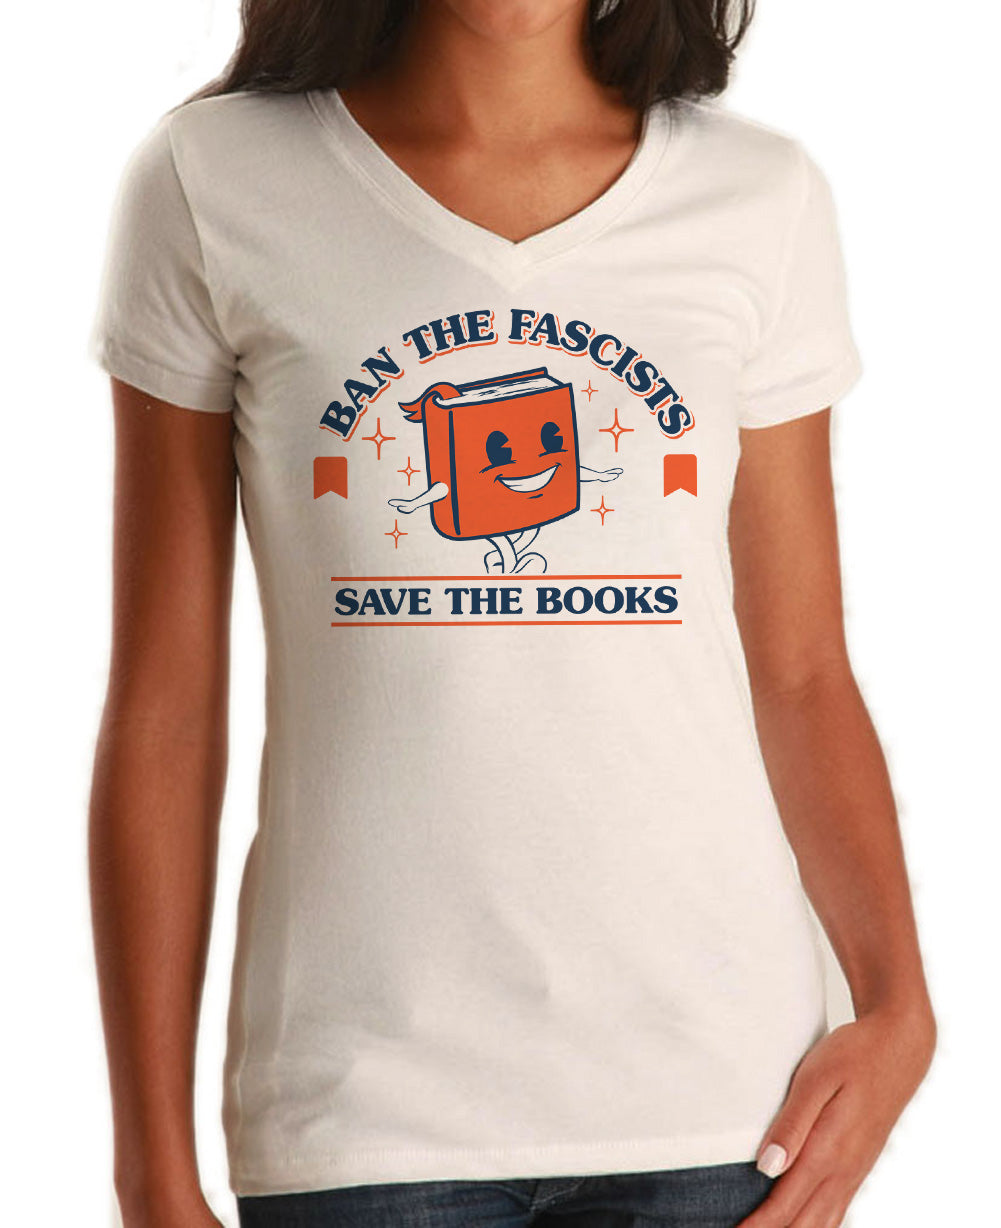 Women's Ban The Fascists Save The Books Vneck T-Shirt